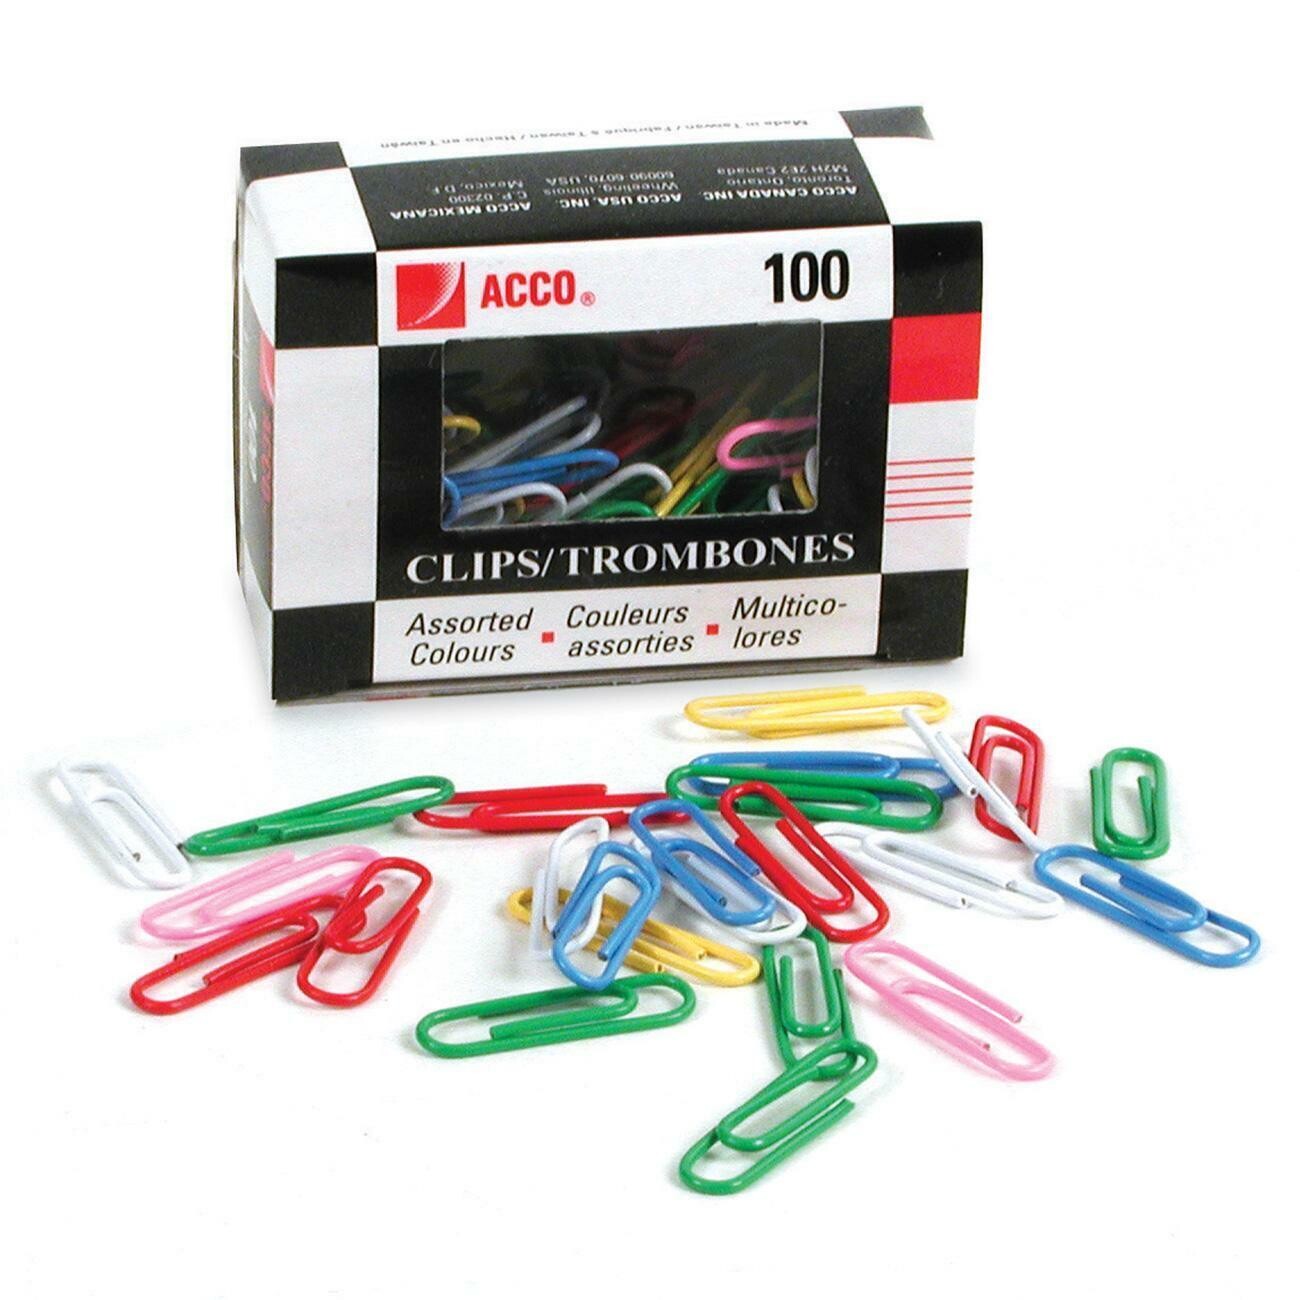 Paper Clips, #4 100 Pack,2", Assorted Colours, Acme